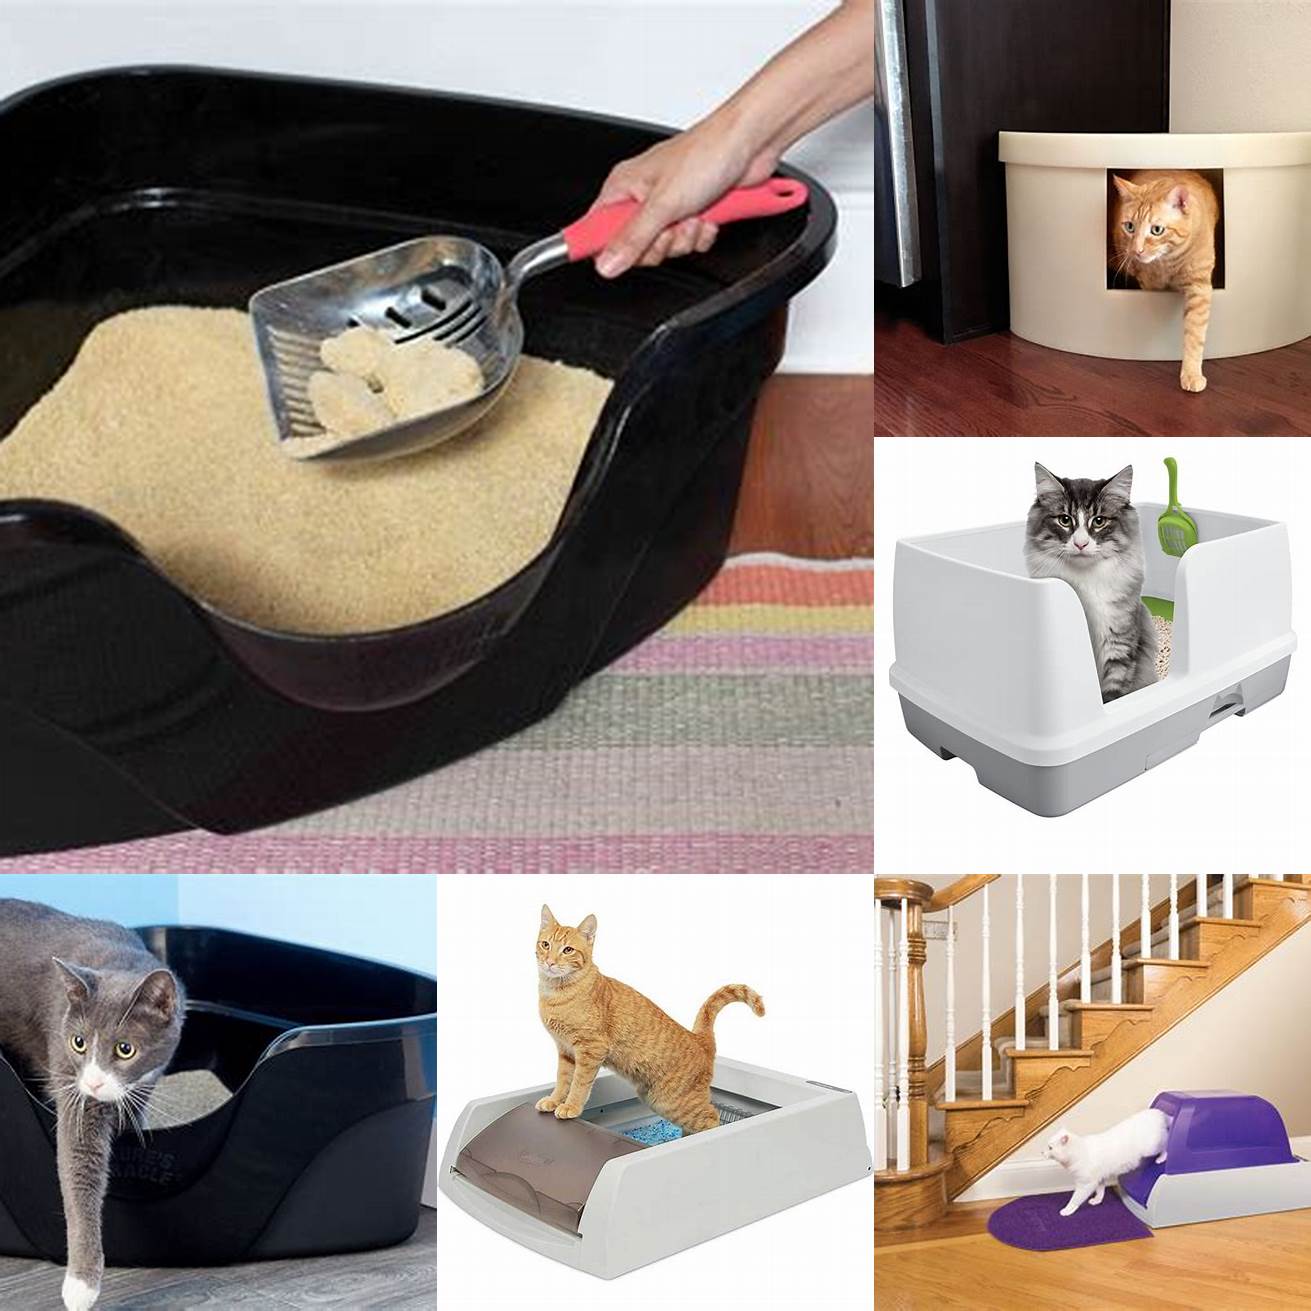 Keep your cats litter box clean and easily accessible